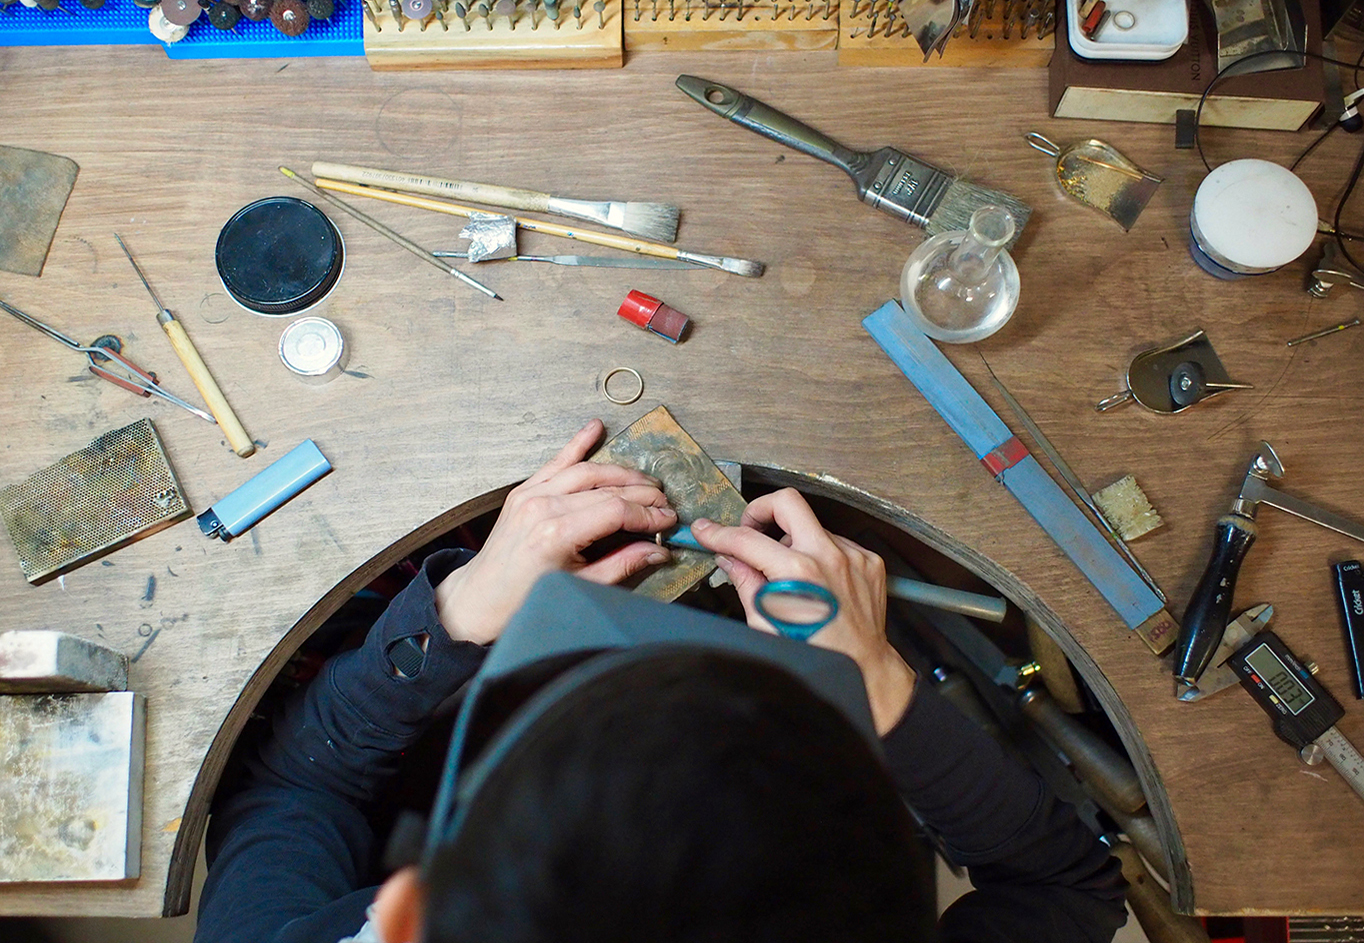 Birdseye view of Amanda's head and hands working at her jewellery bench with tools and material spread over the surface.